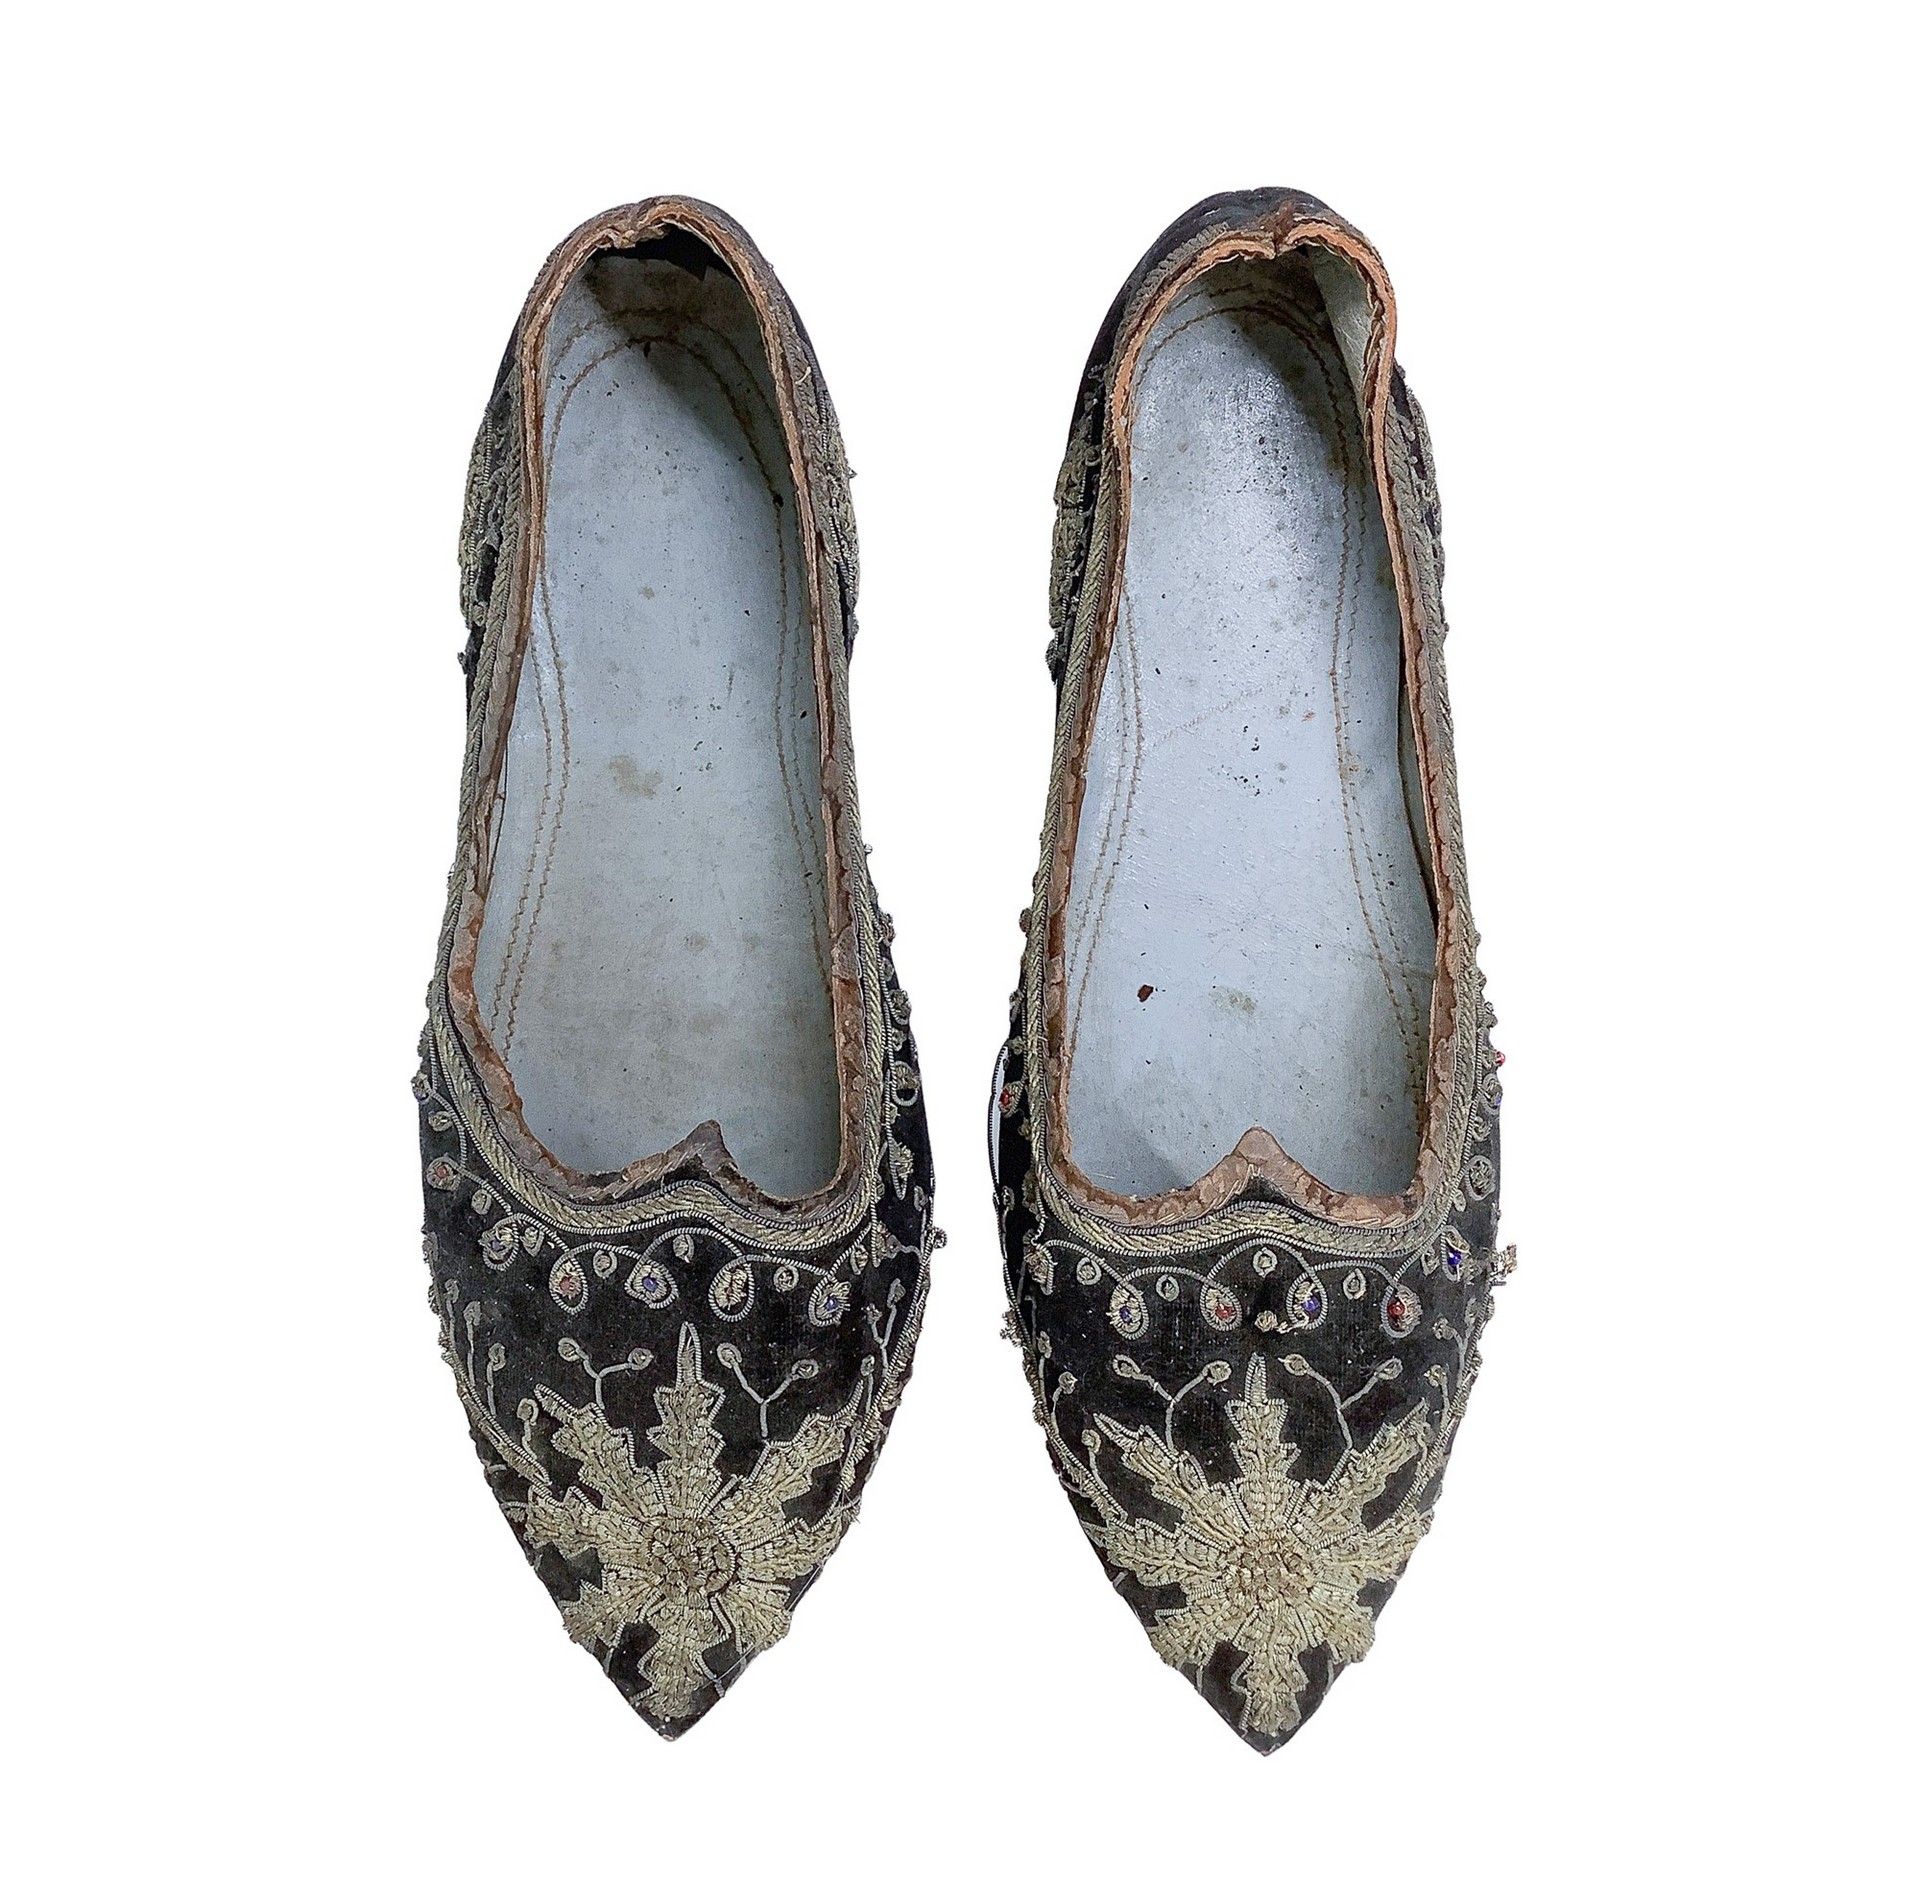 Null Vintage slipper shoes , Early 19th century Embroidered noble shoes